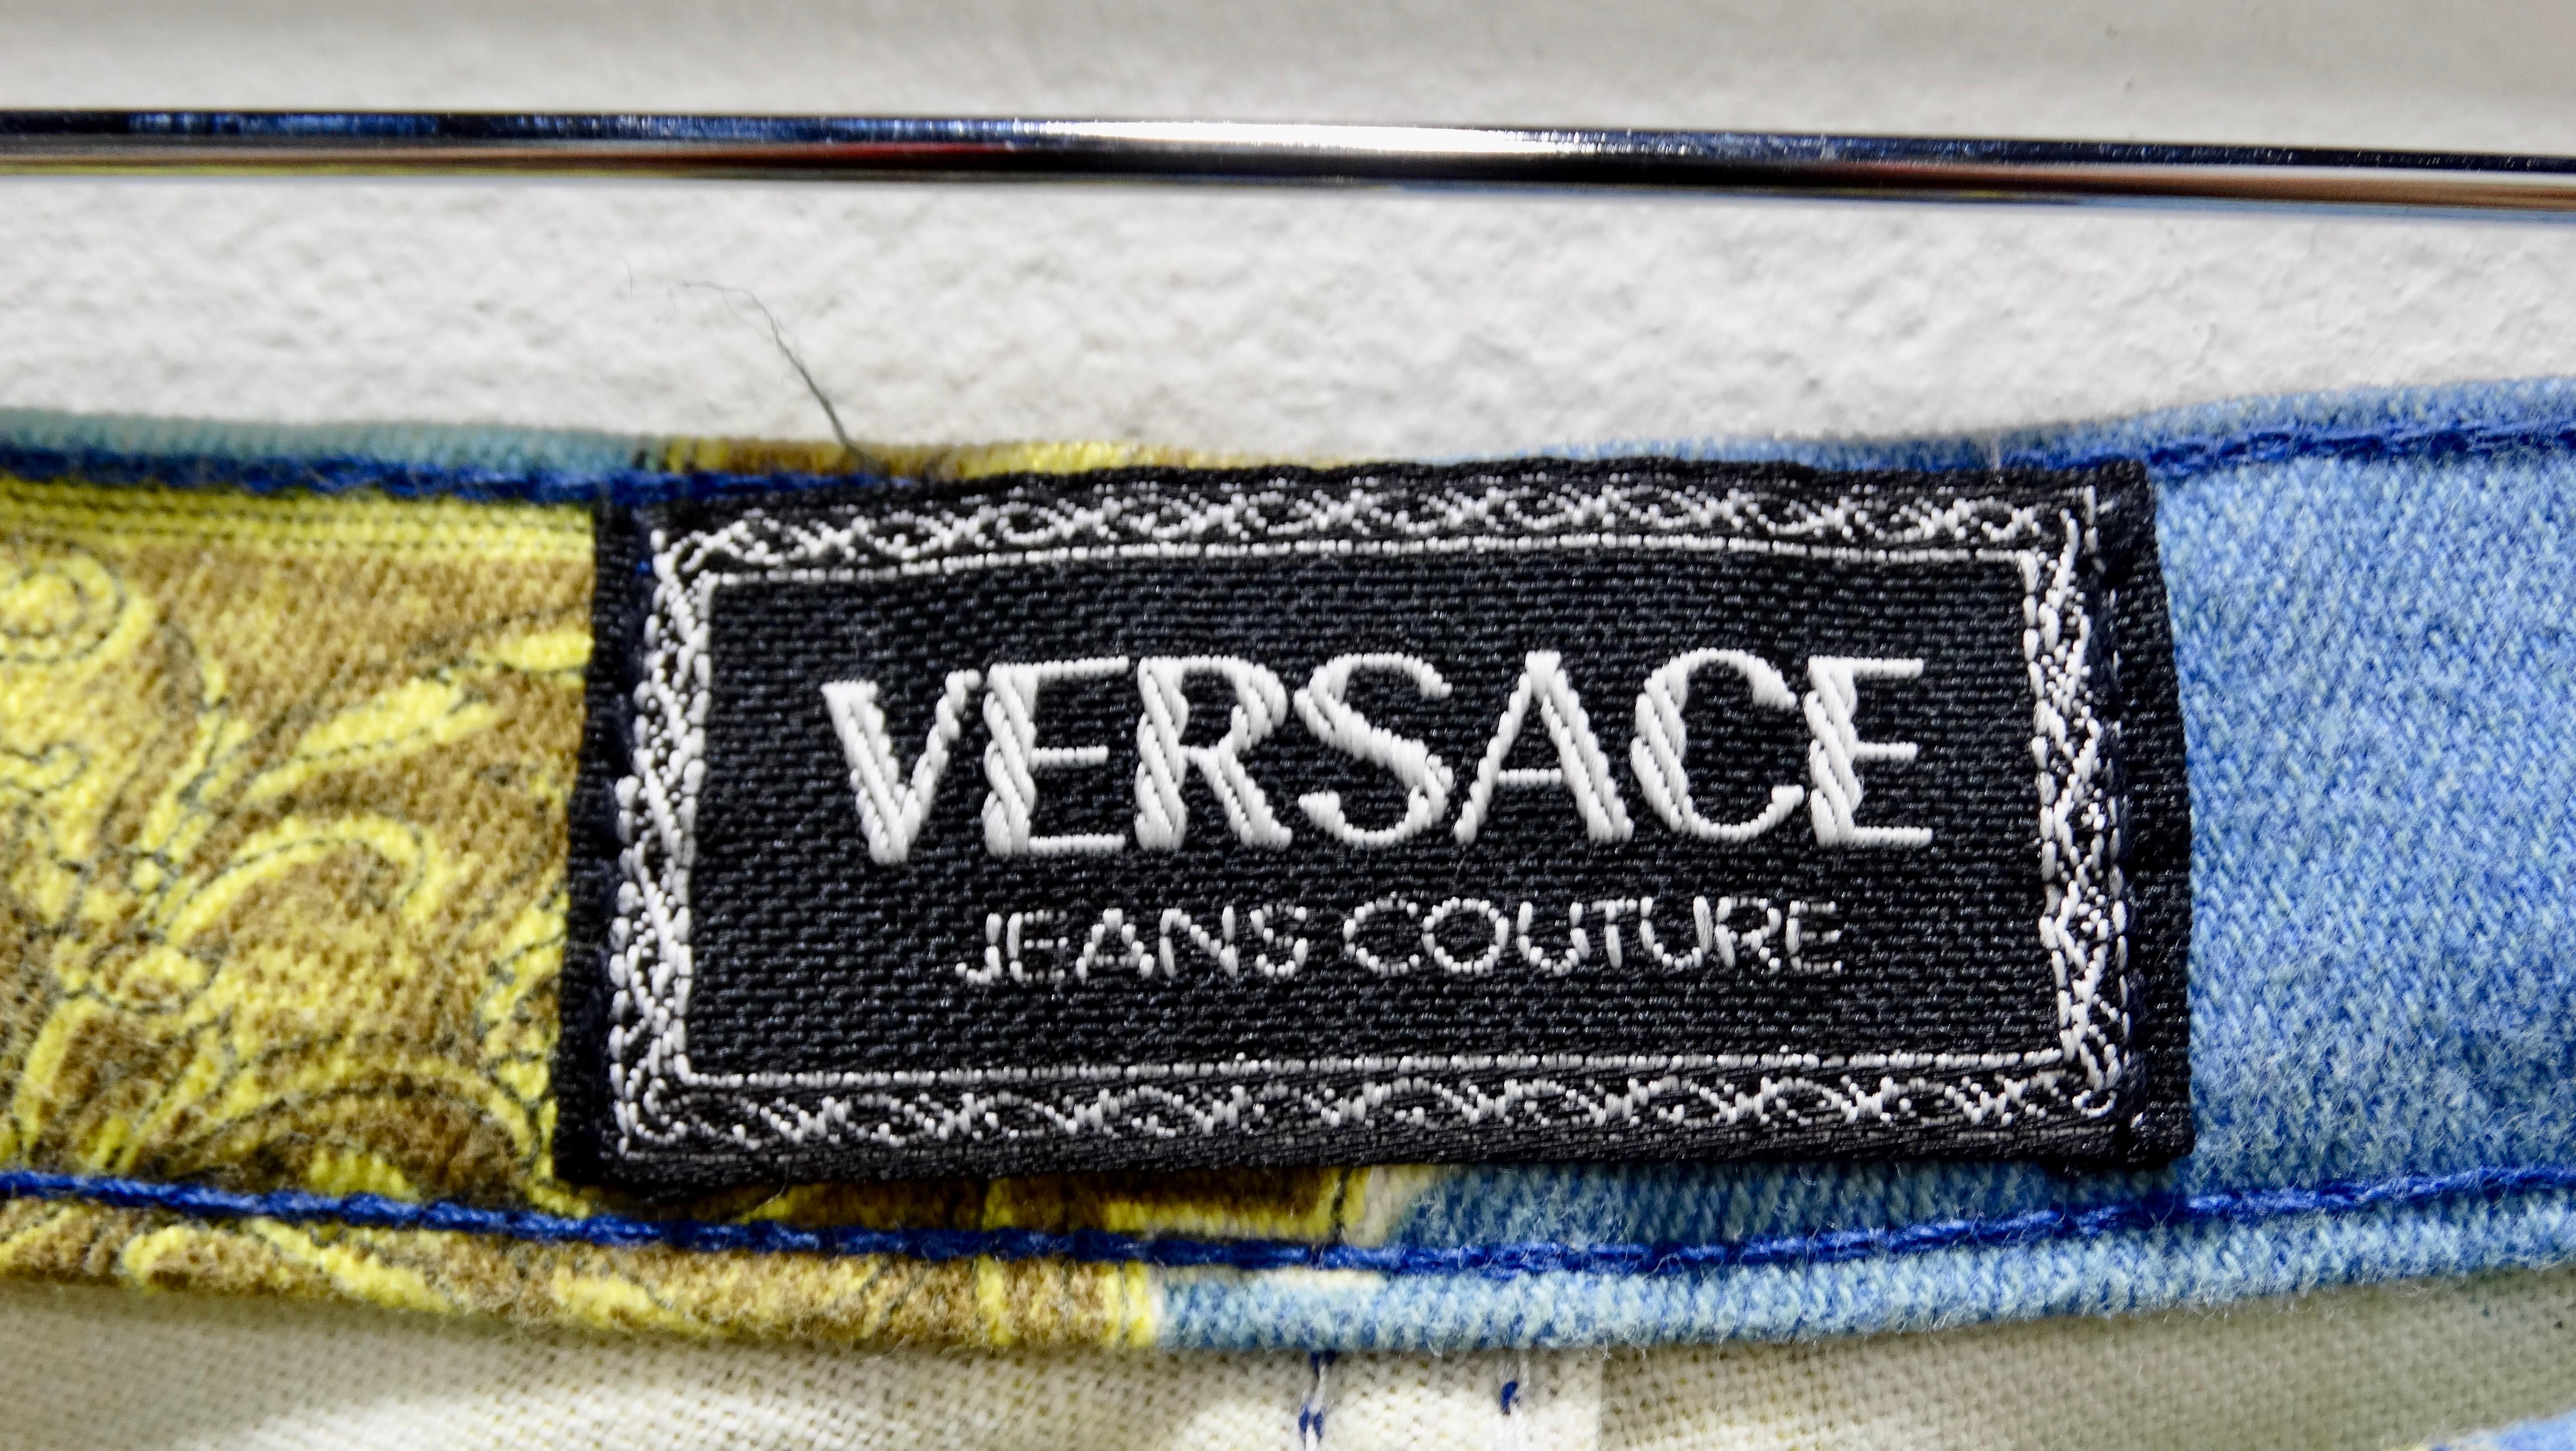 Gianni Versace Ocean Print Jeans For Sale 2